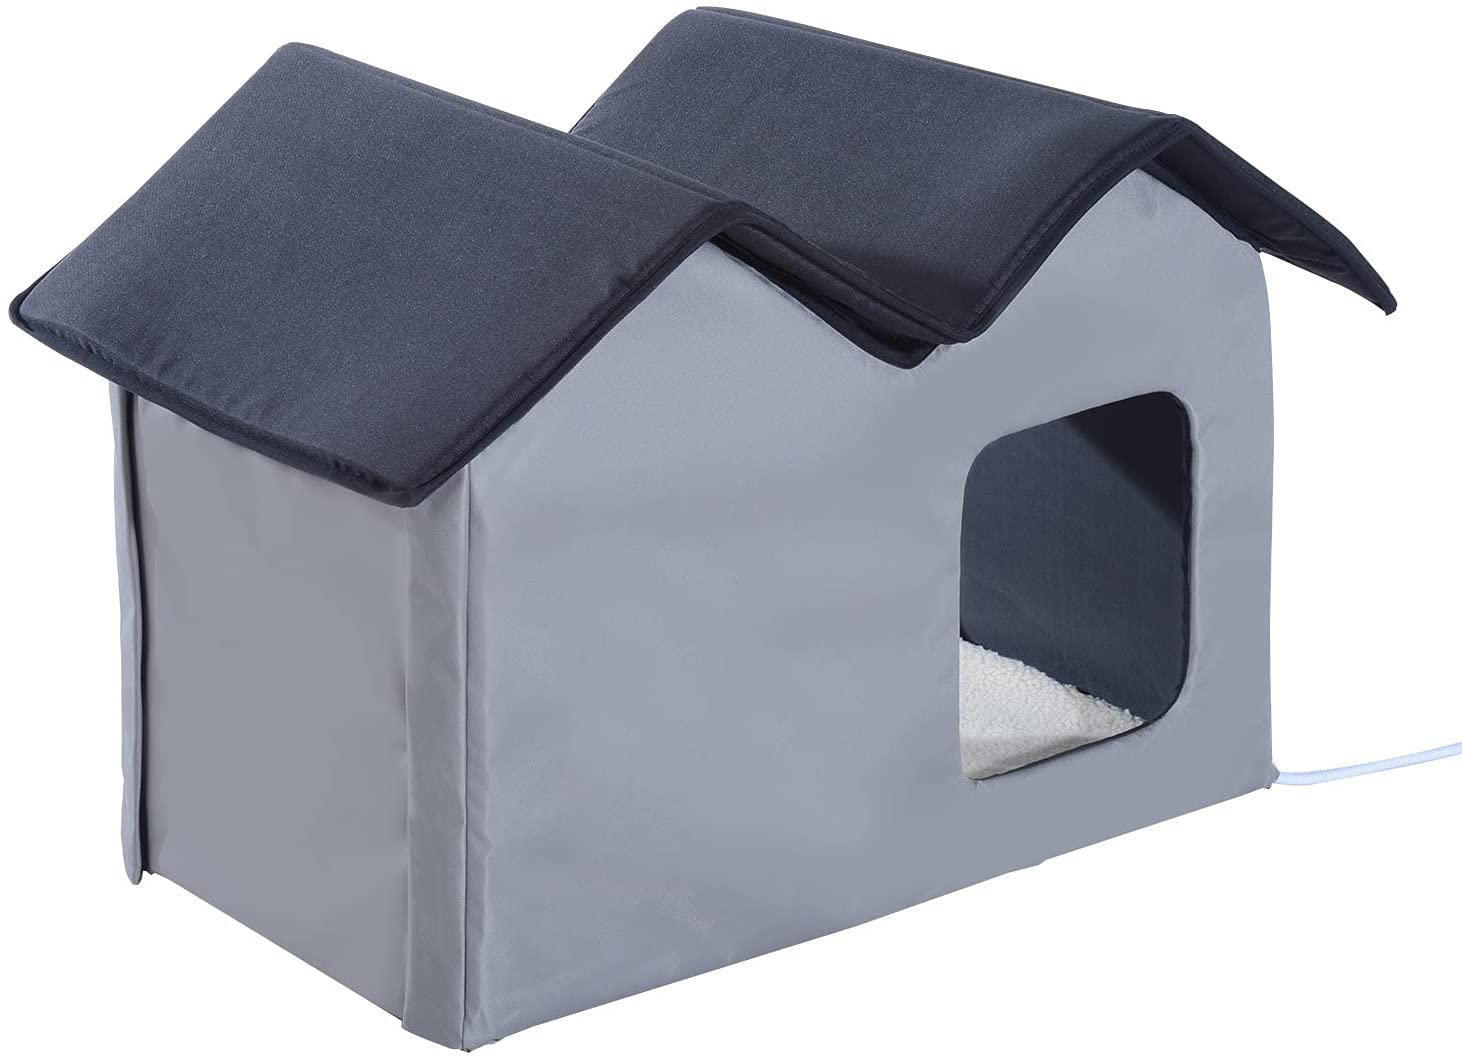 Pawhut Double Heated Portable Indoor Cat Shelter House